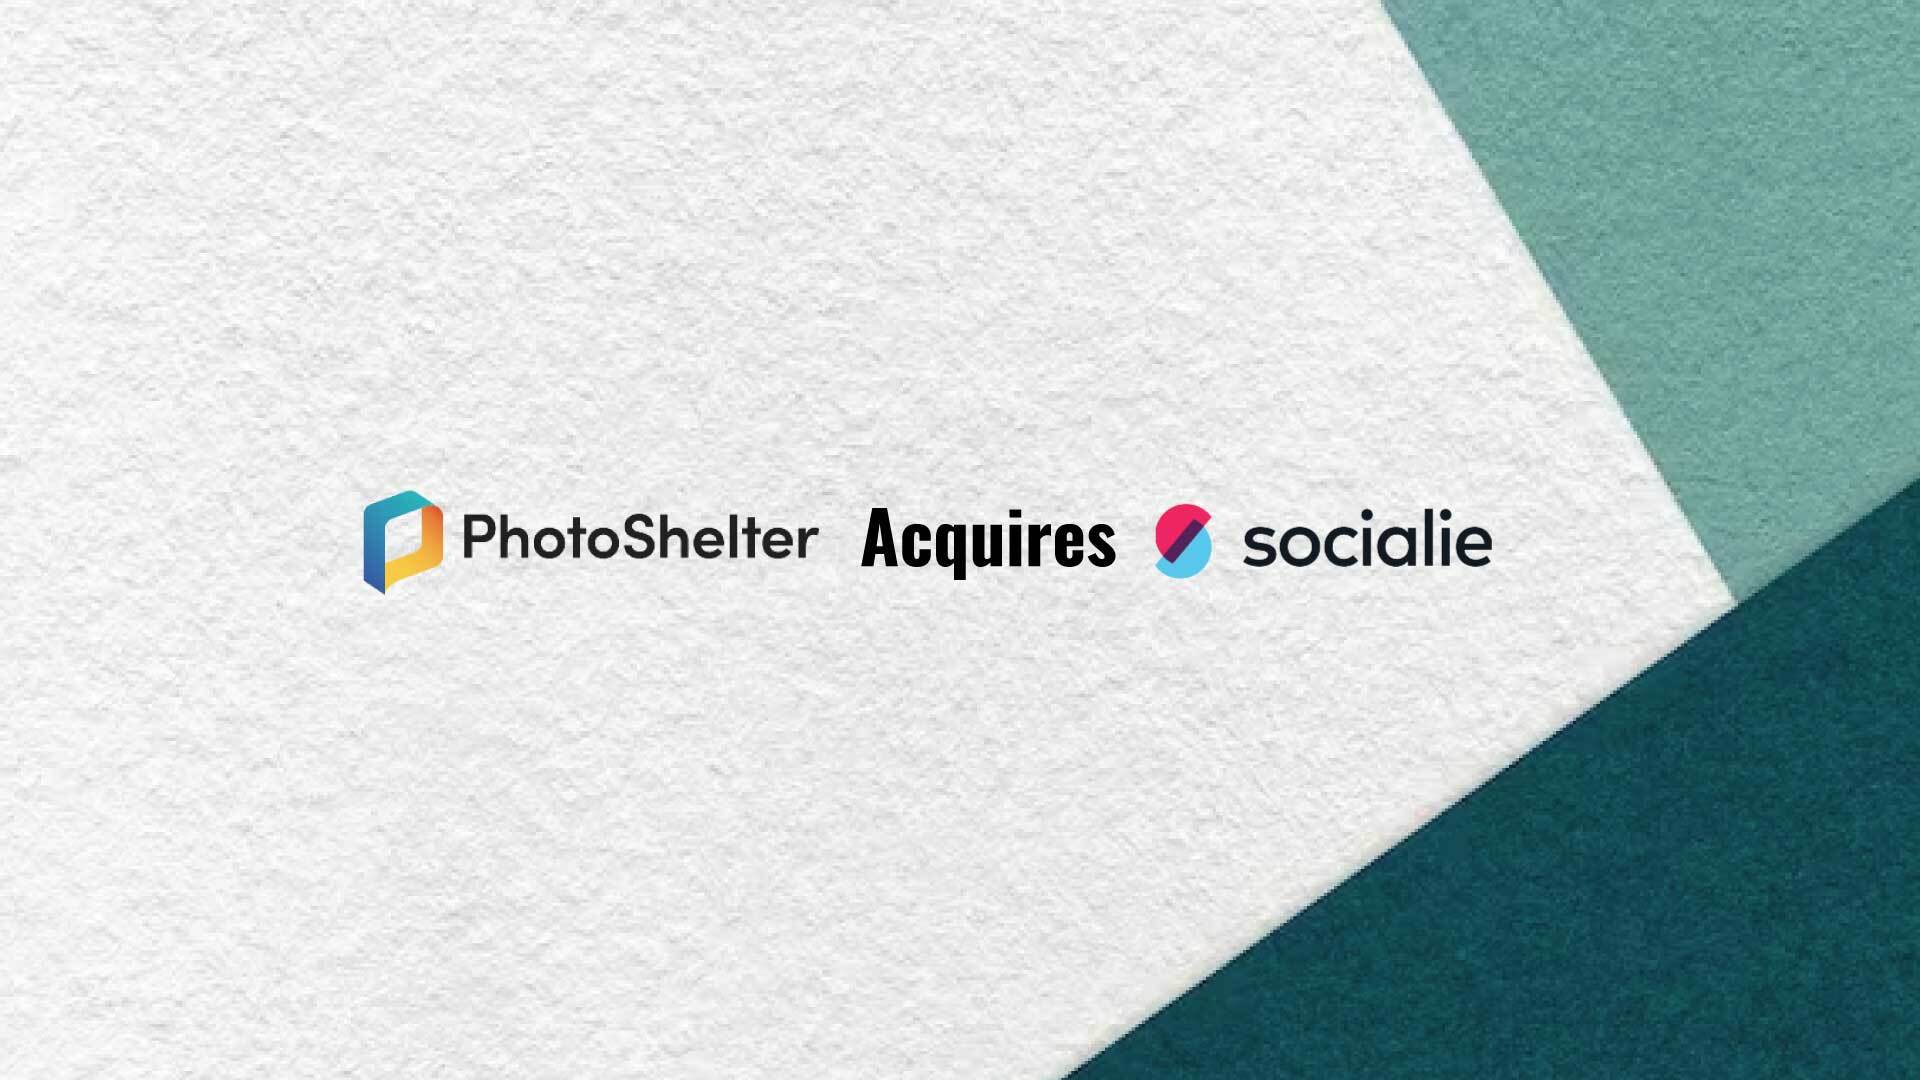 PhotoShelter Acquires Socialie, Enhancing Real-Time Content Distribution, Automation and Analytics for Brands